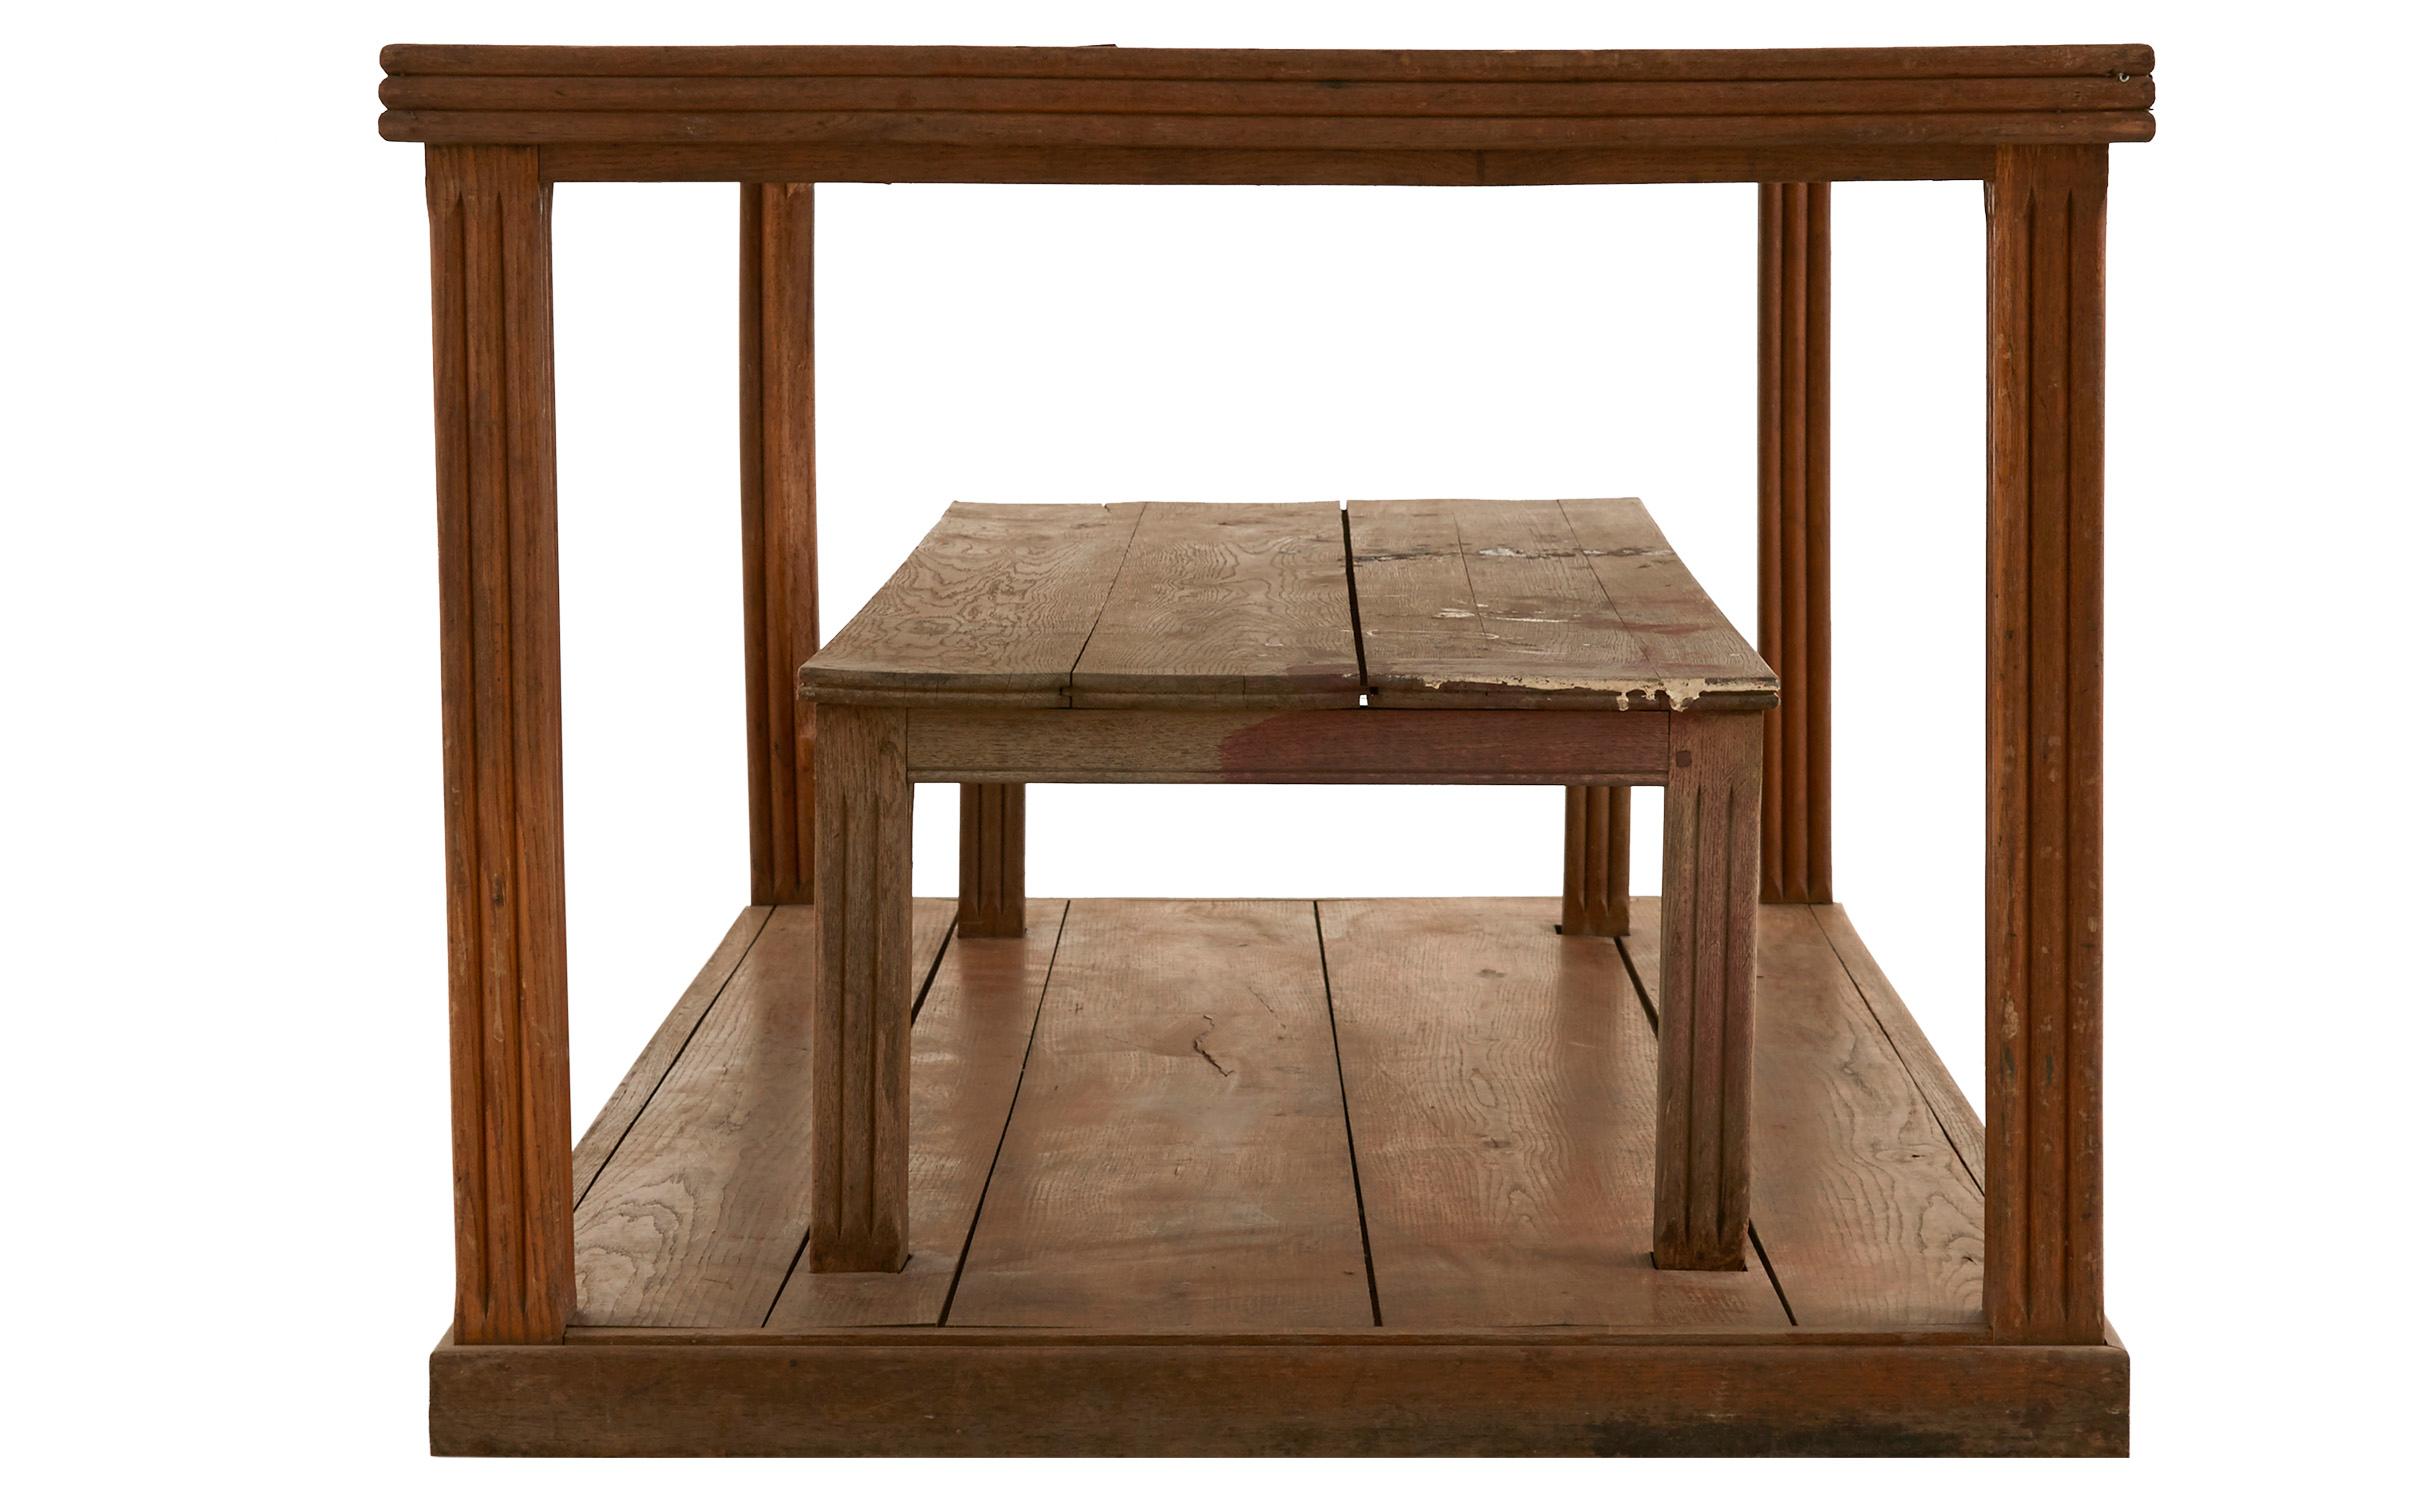 Early 20th Century Wooden Dressmaker's Table (Holz)